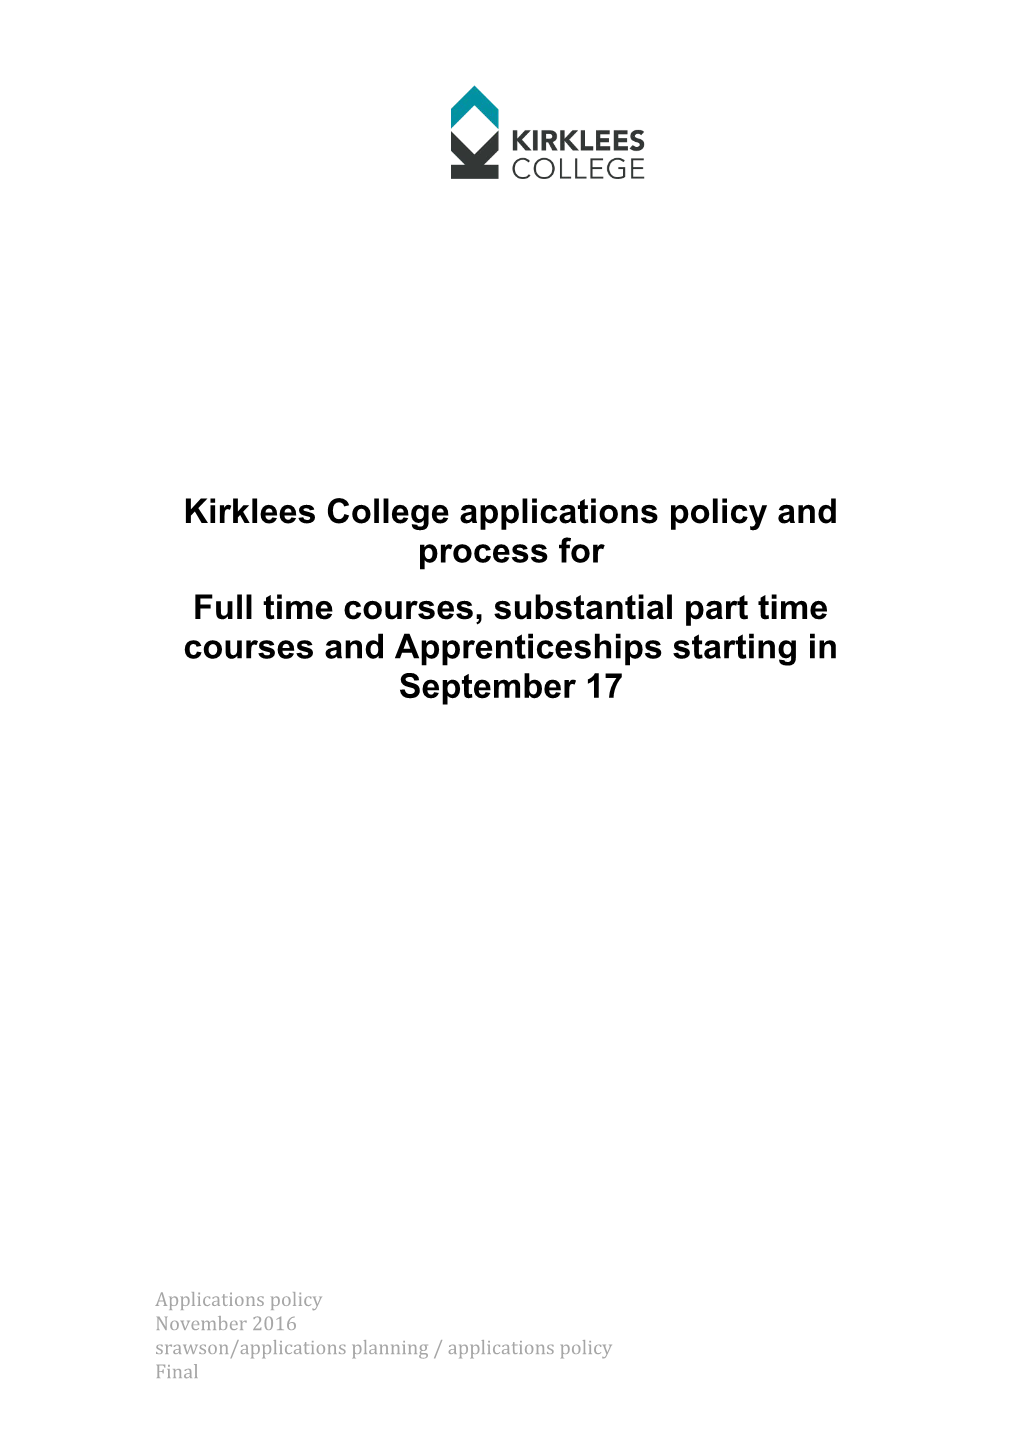 Kirklees College Applications Policy and Process For